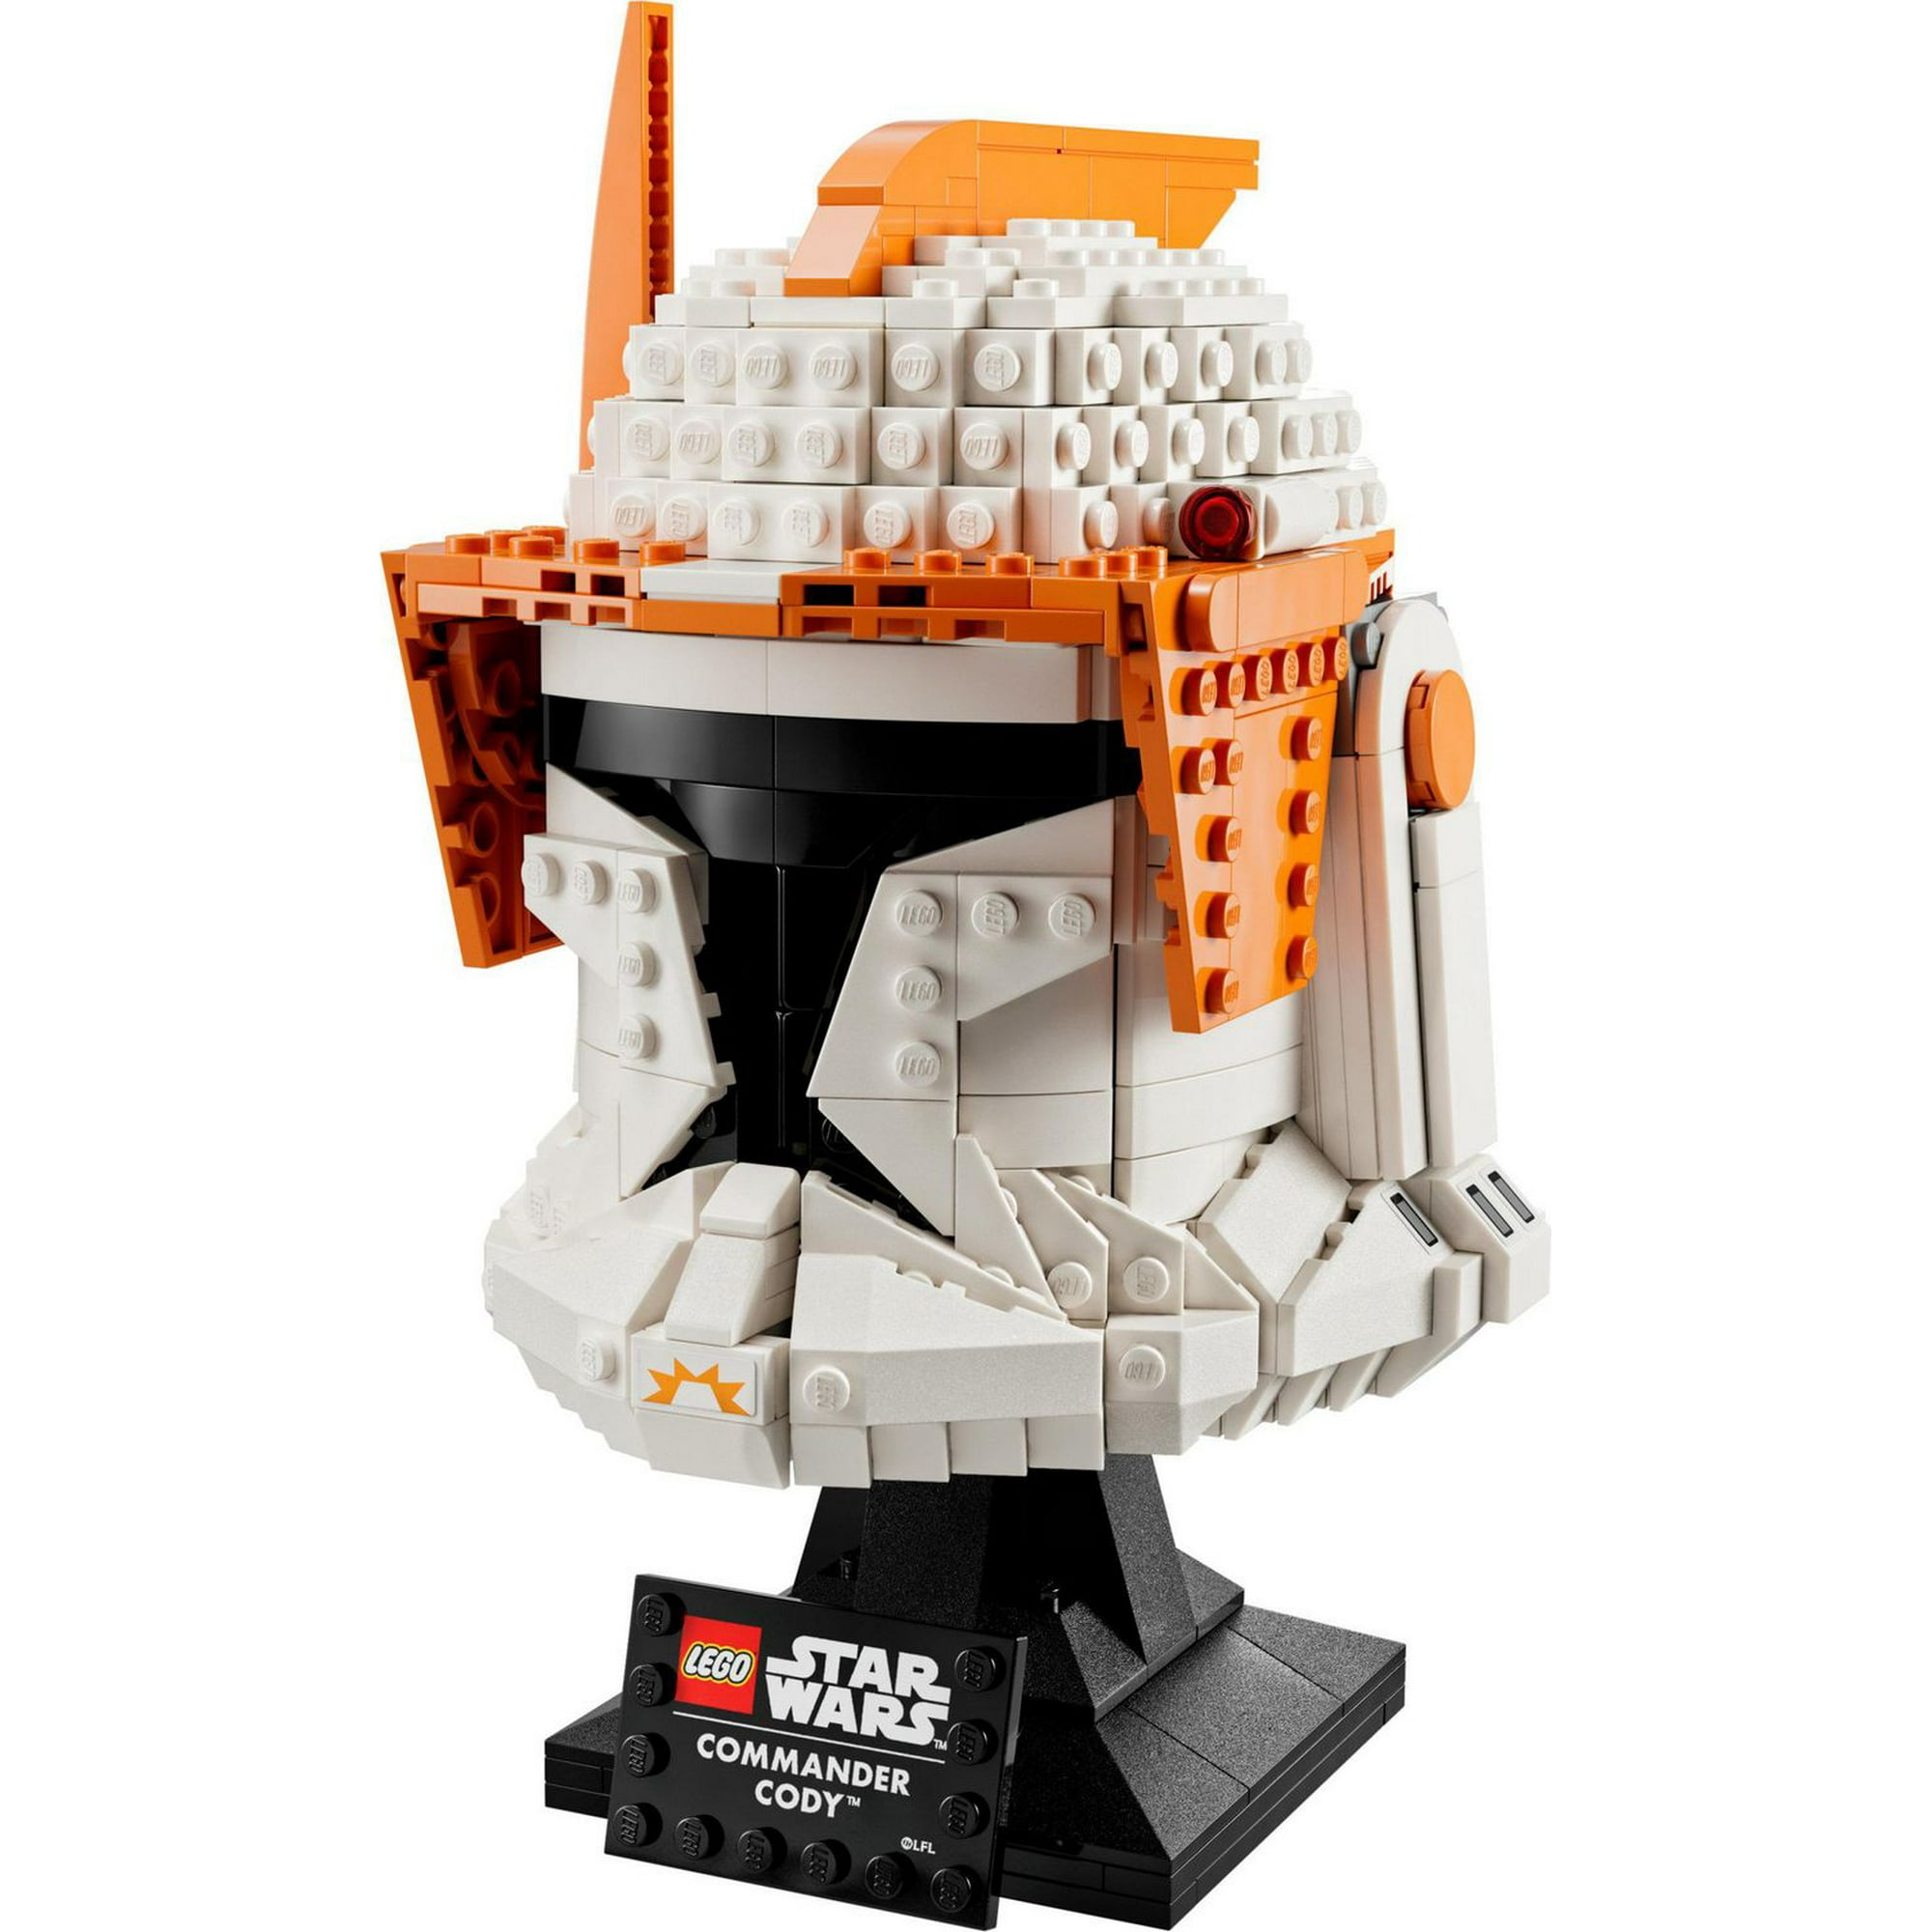 LEGO Star Wars Clone Commander Cody Helmet 75350 Collectible Building Set -  Featuring Authentic Details, Office Decor Display Model for Adults, The  Clone Wars Collection Memorabilia and Gift Idea, Includes 766 Pieces